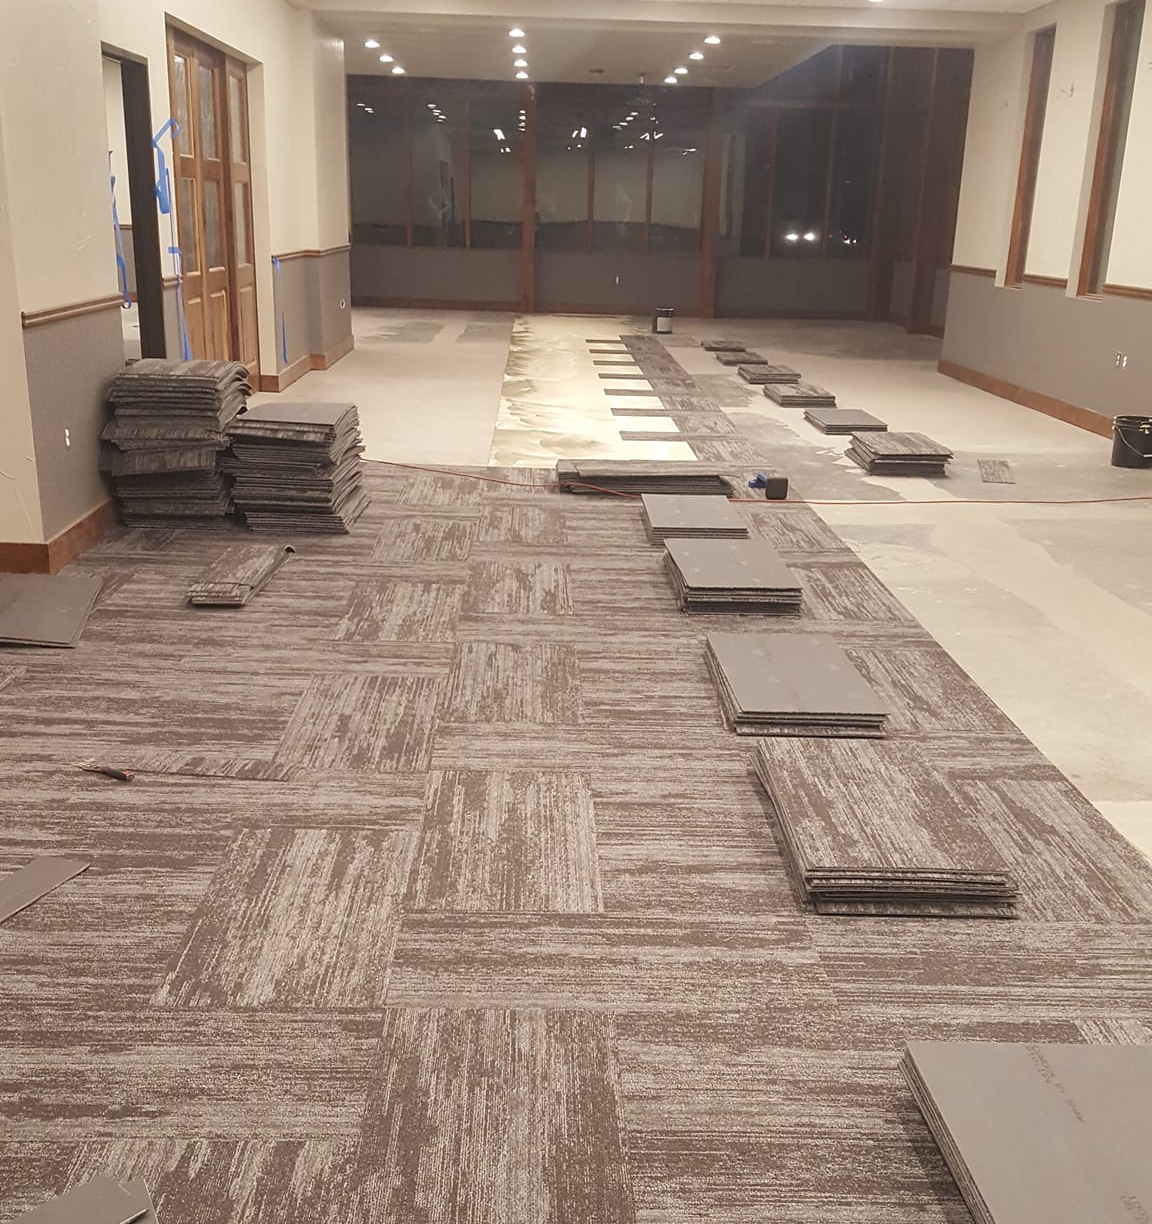 Carpet tiles are being installed in this large commercial space.